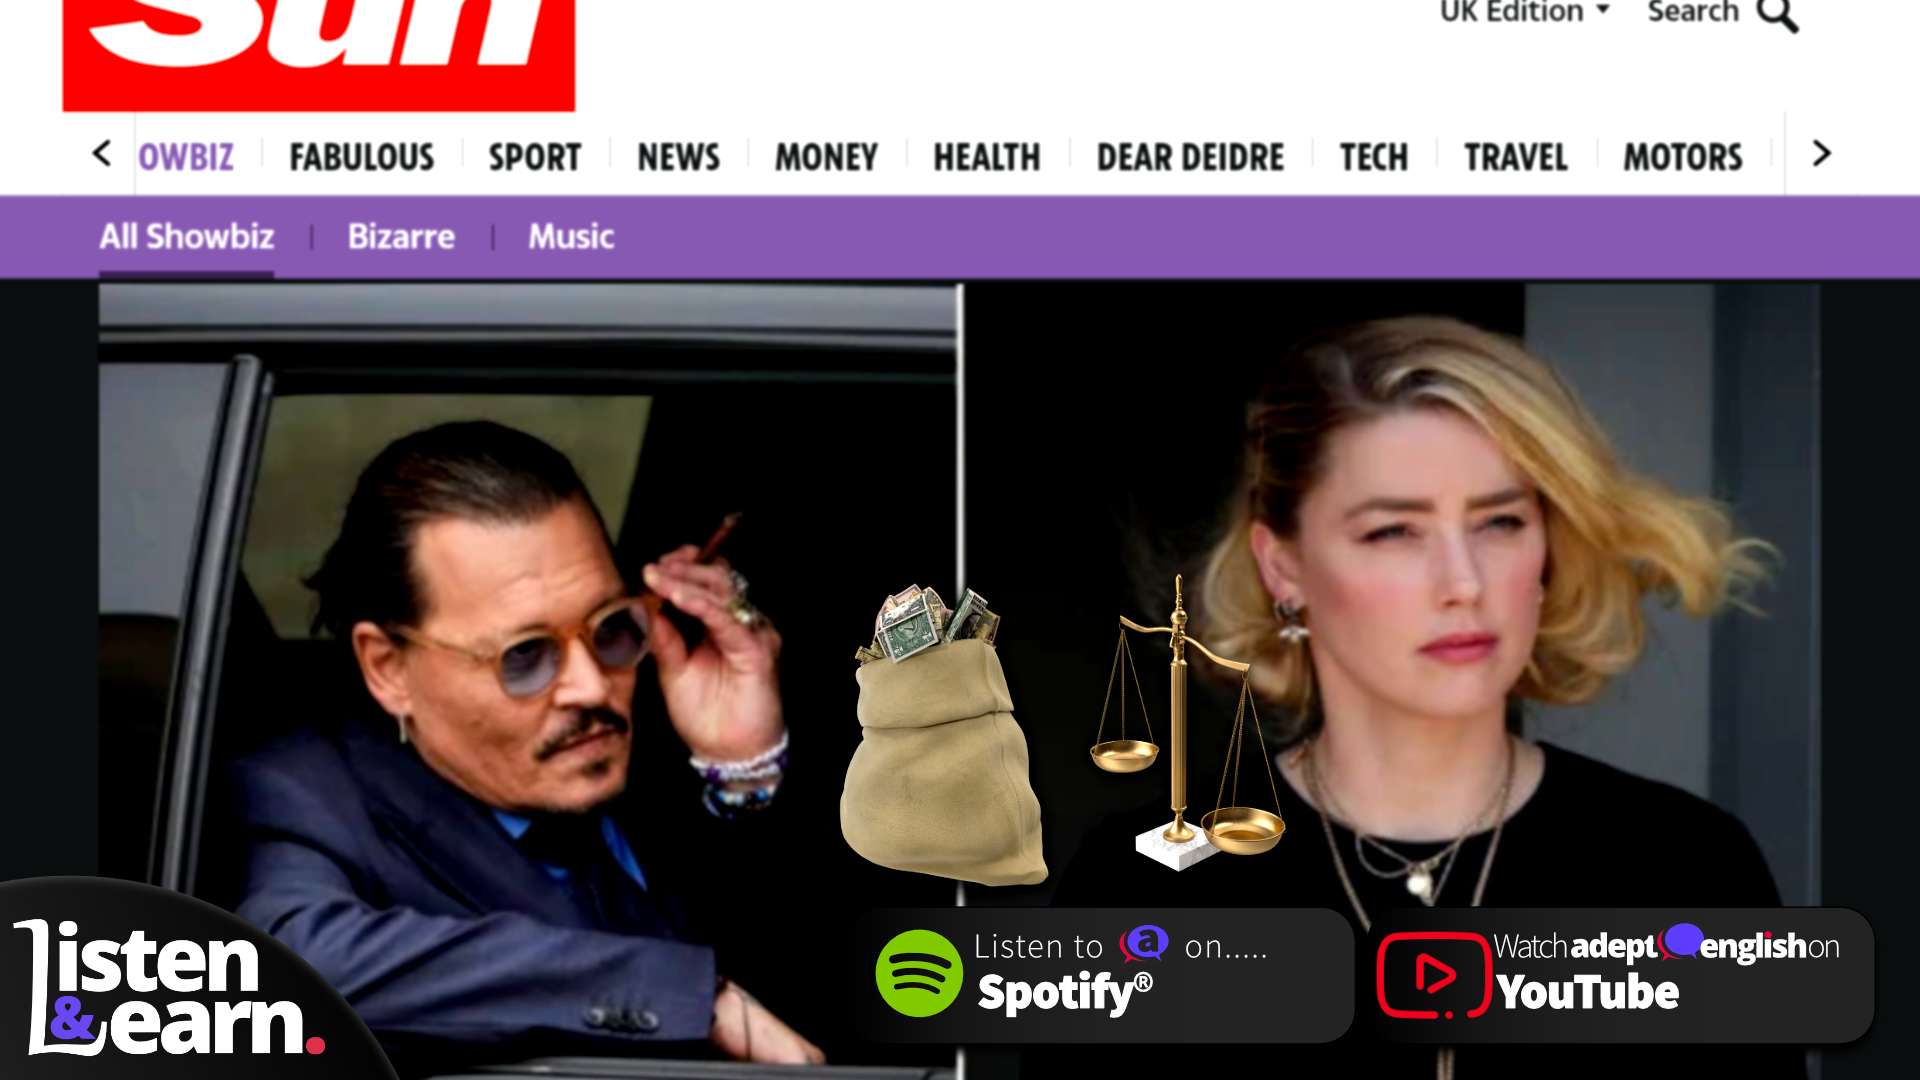 A screenshot of the British Sun newspaper reporting on the Johnny Depp vs Amber Heard trial. Start improving your conversations skills today by listening in on our English conversation lessons.